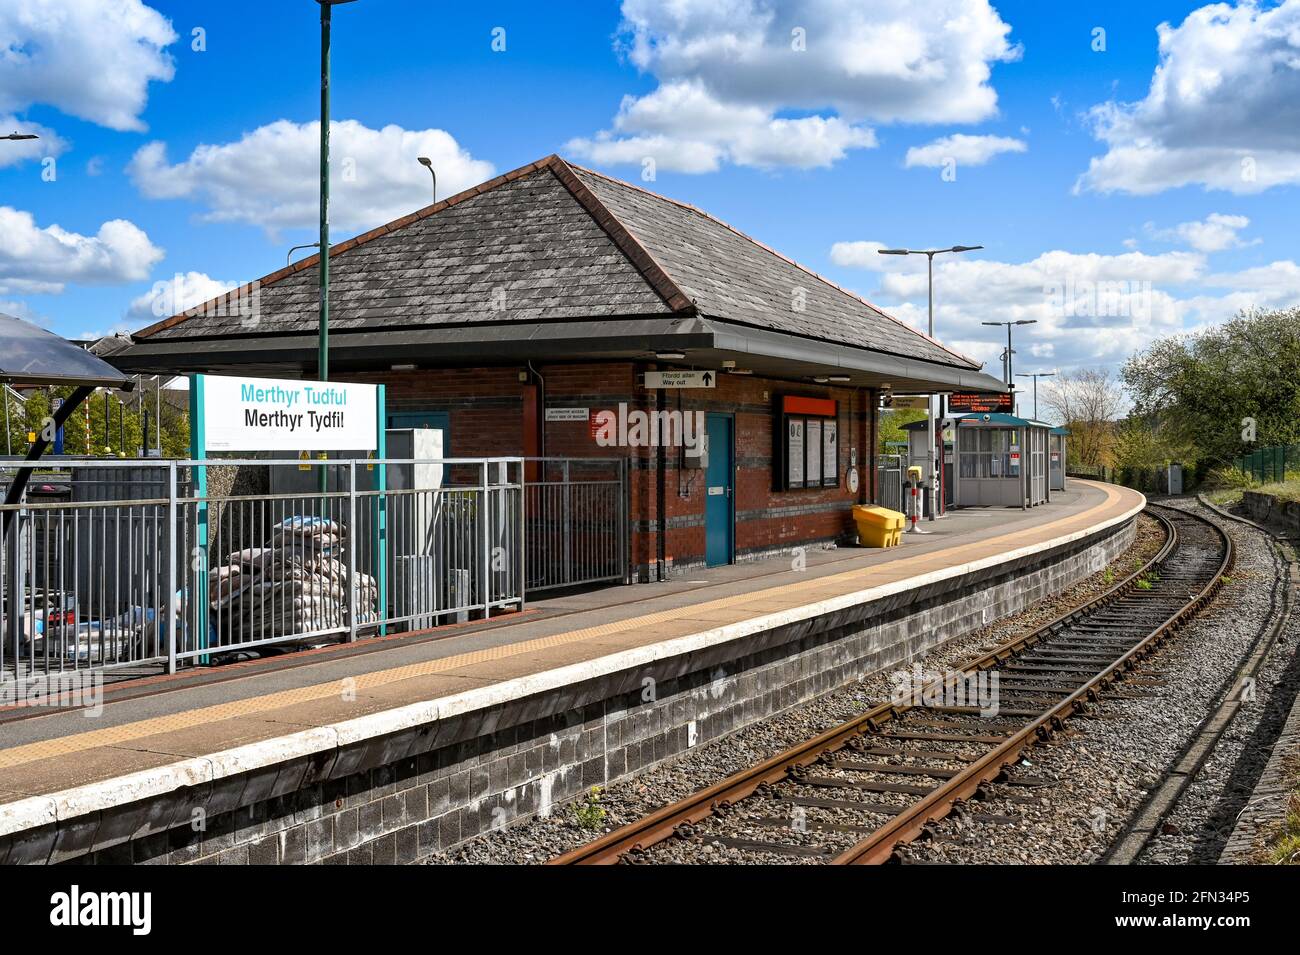 Merthyr Tydfil,  Wales - May 2021: Merthyr Tydfil railway station in South Wales. It is the terminus of the line which links the valleys with Cardiff. Stock Photo